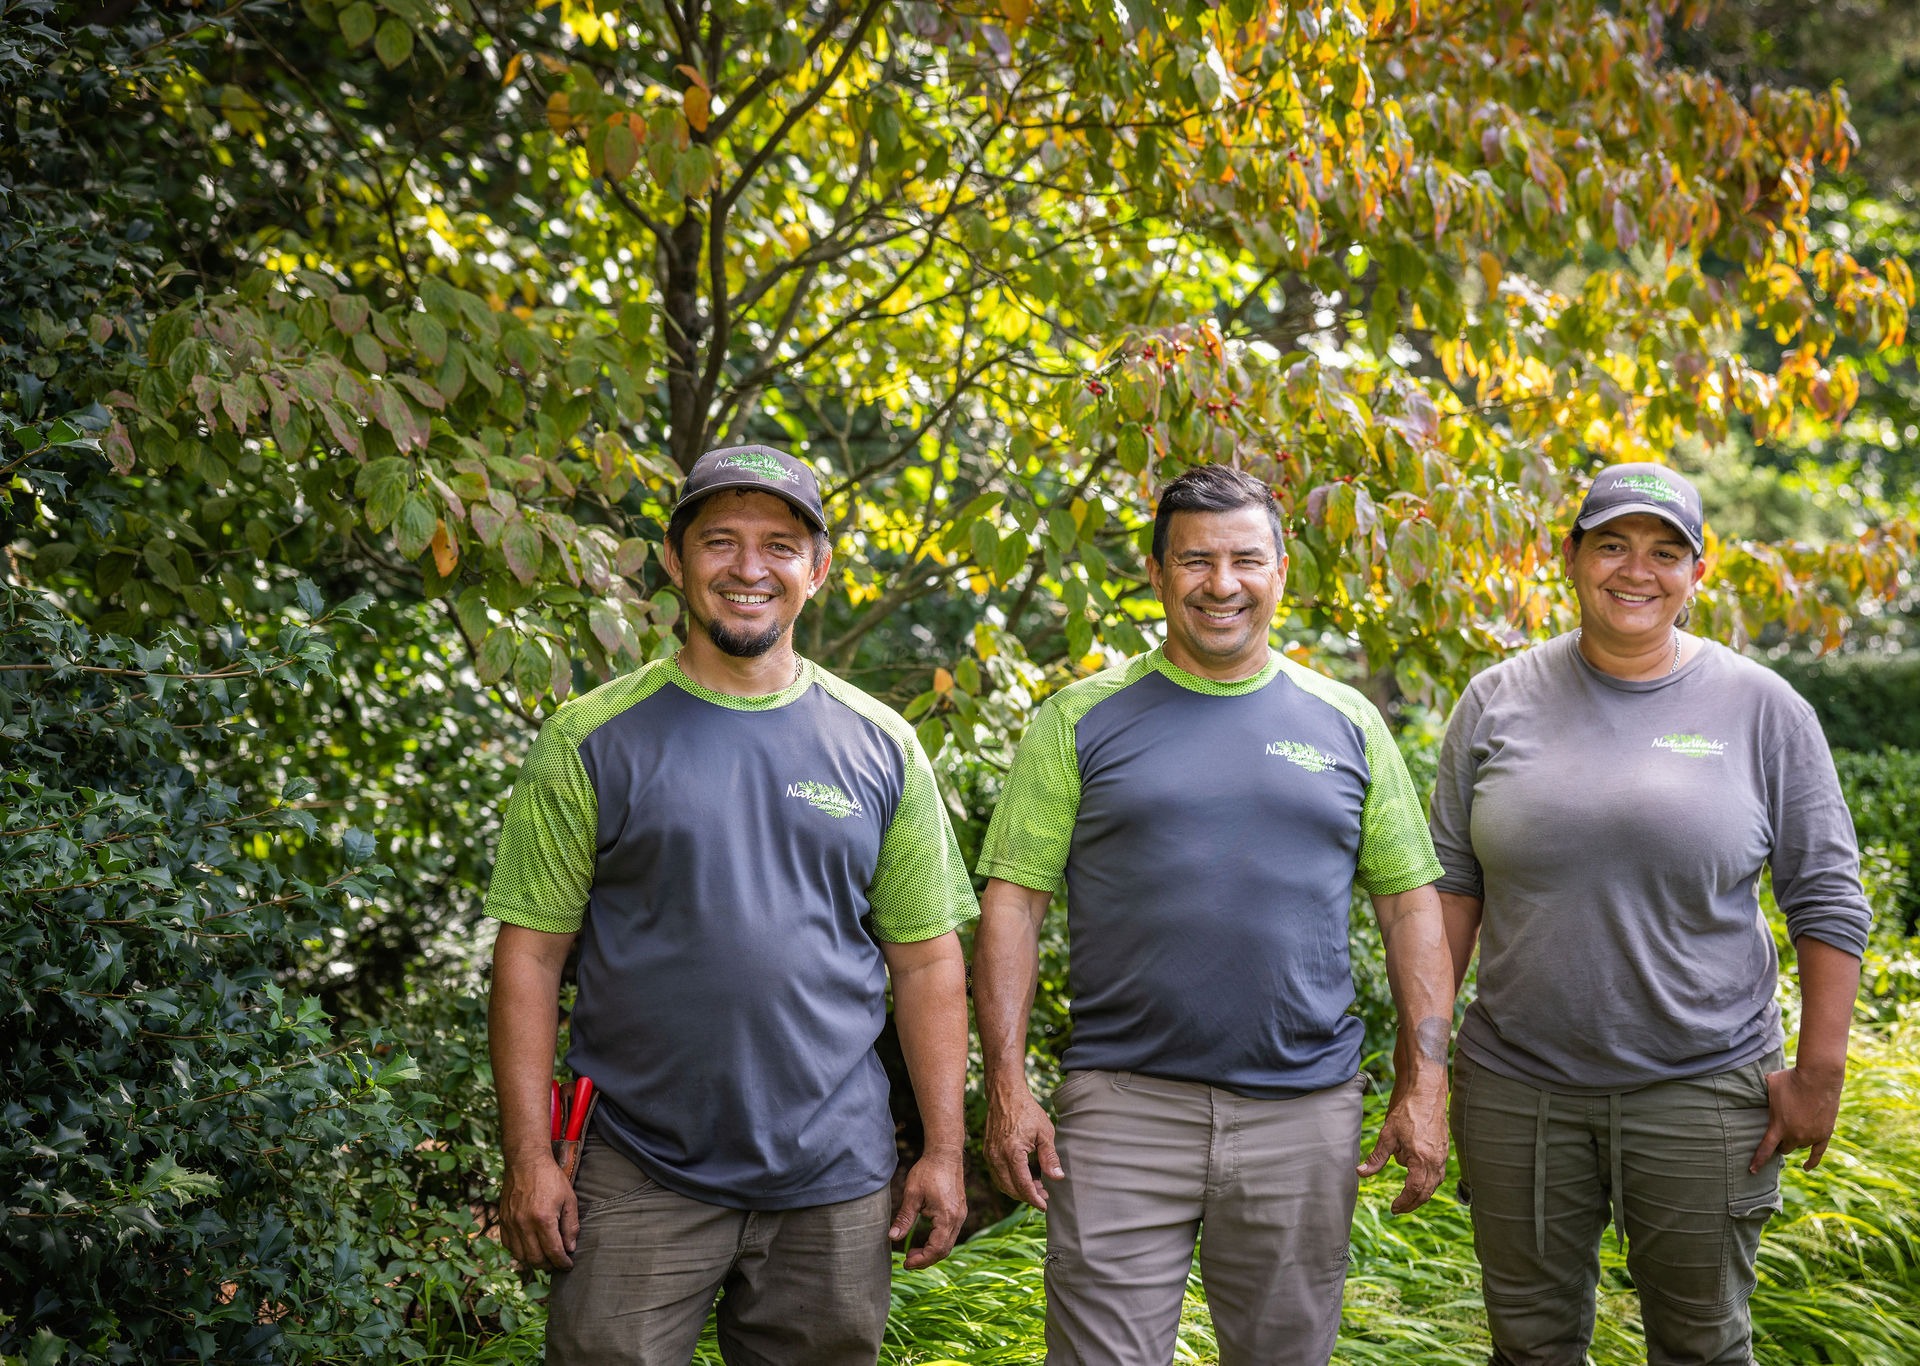 Three people stand smiling outdoors, wearing work uniforms with green accents, surrounded by lush greenery and plants in a garden setting.